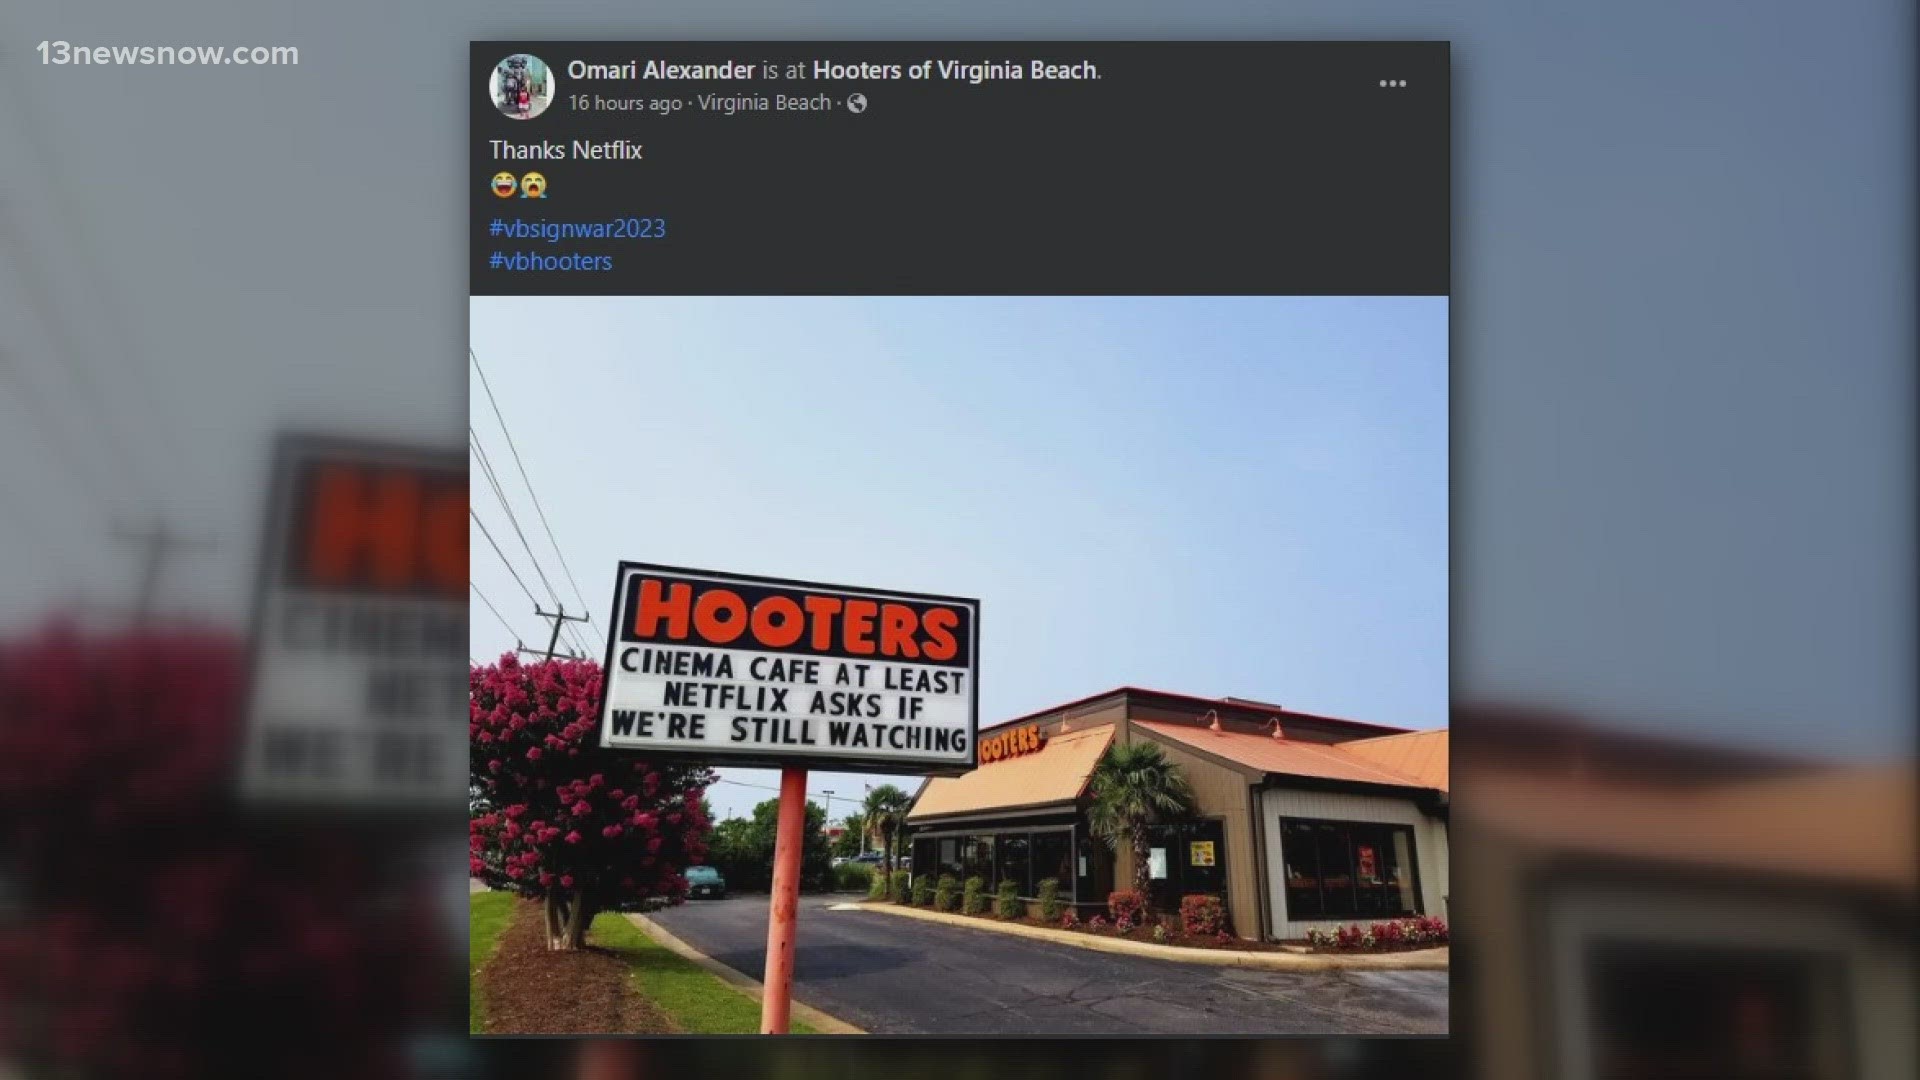 Things have escalated in the VB Sign wars. The businesses are clapping back and 'throwing shade'.